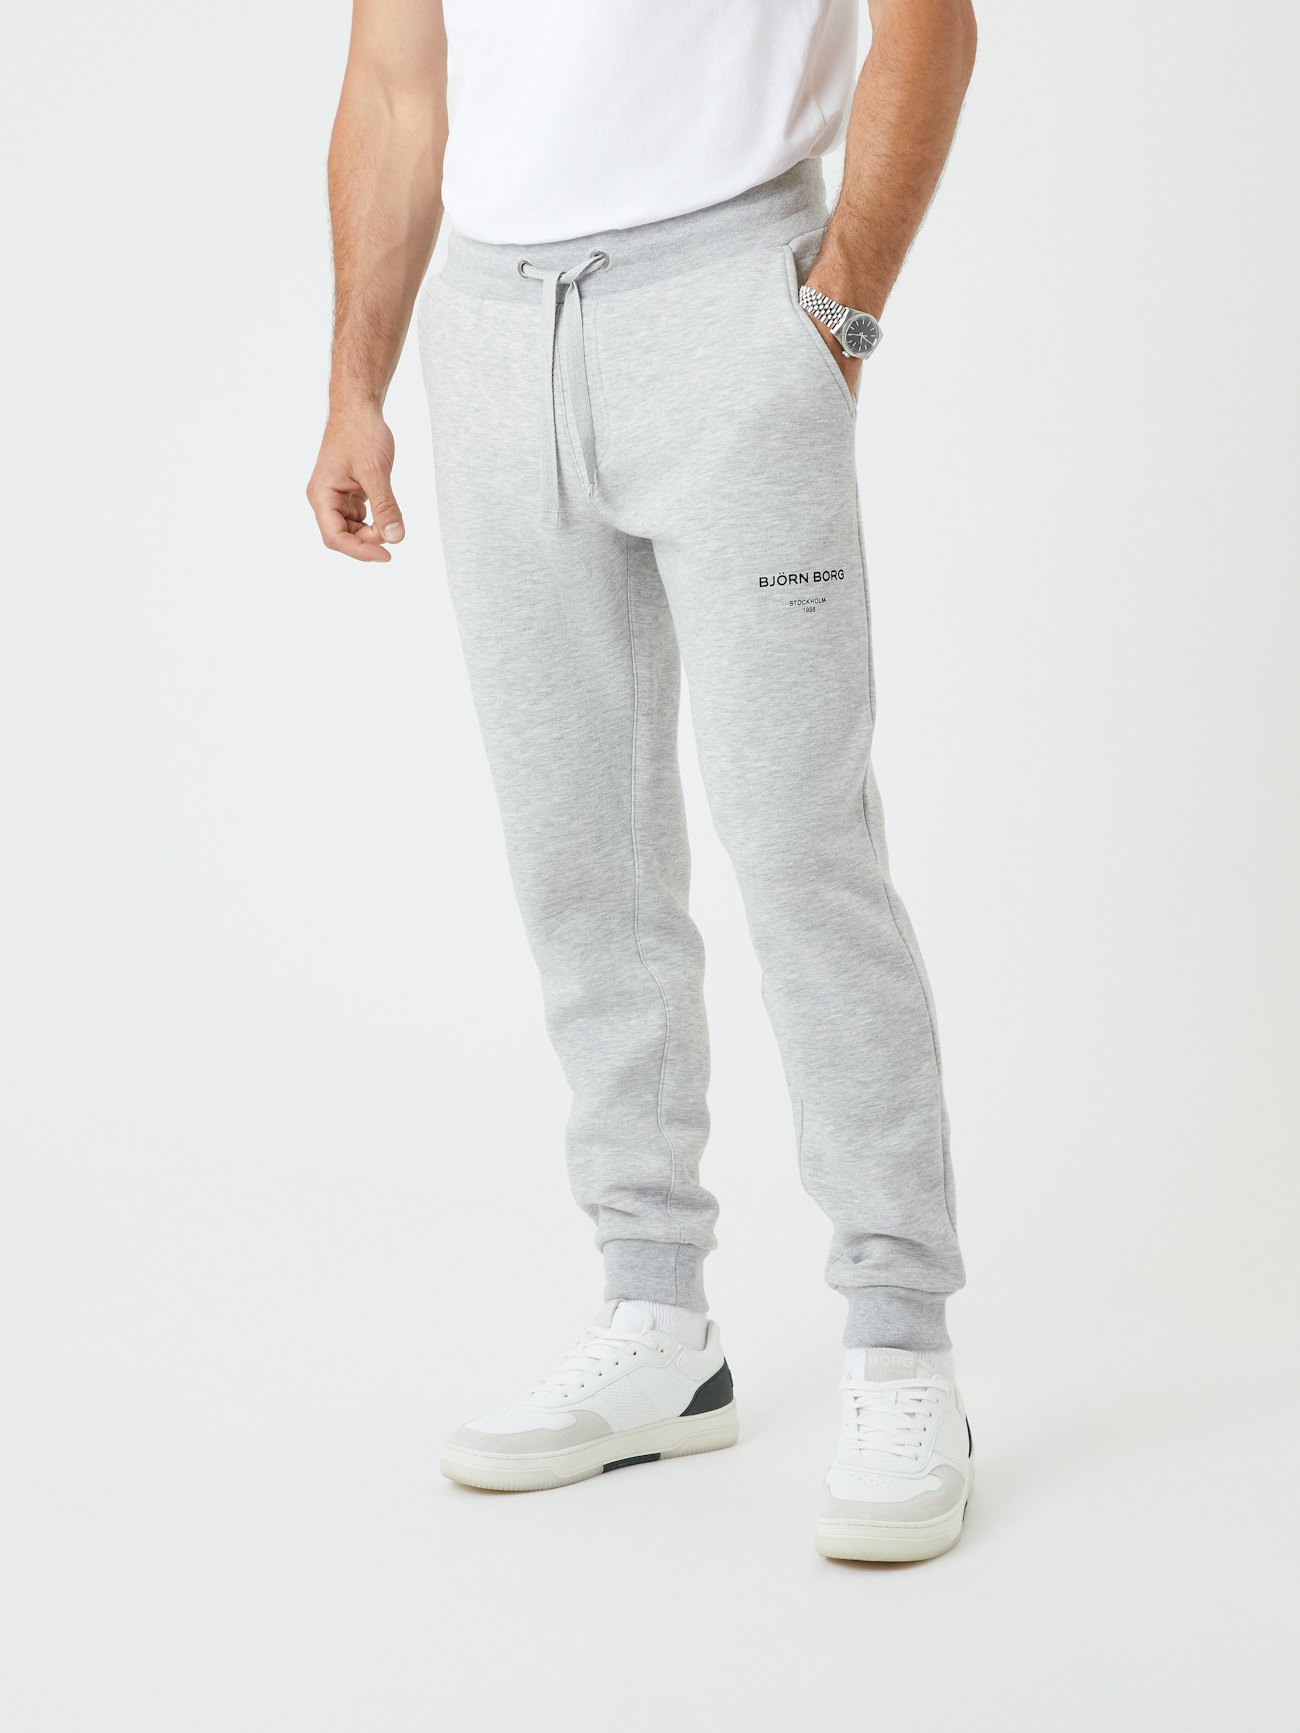 Pack of 2 Mens Oversized Joggers, Sweatpants with Elastic Cuffs